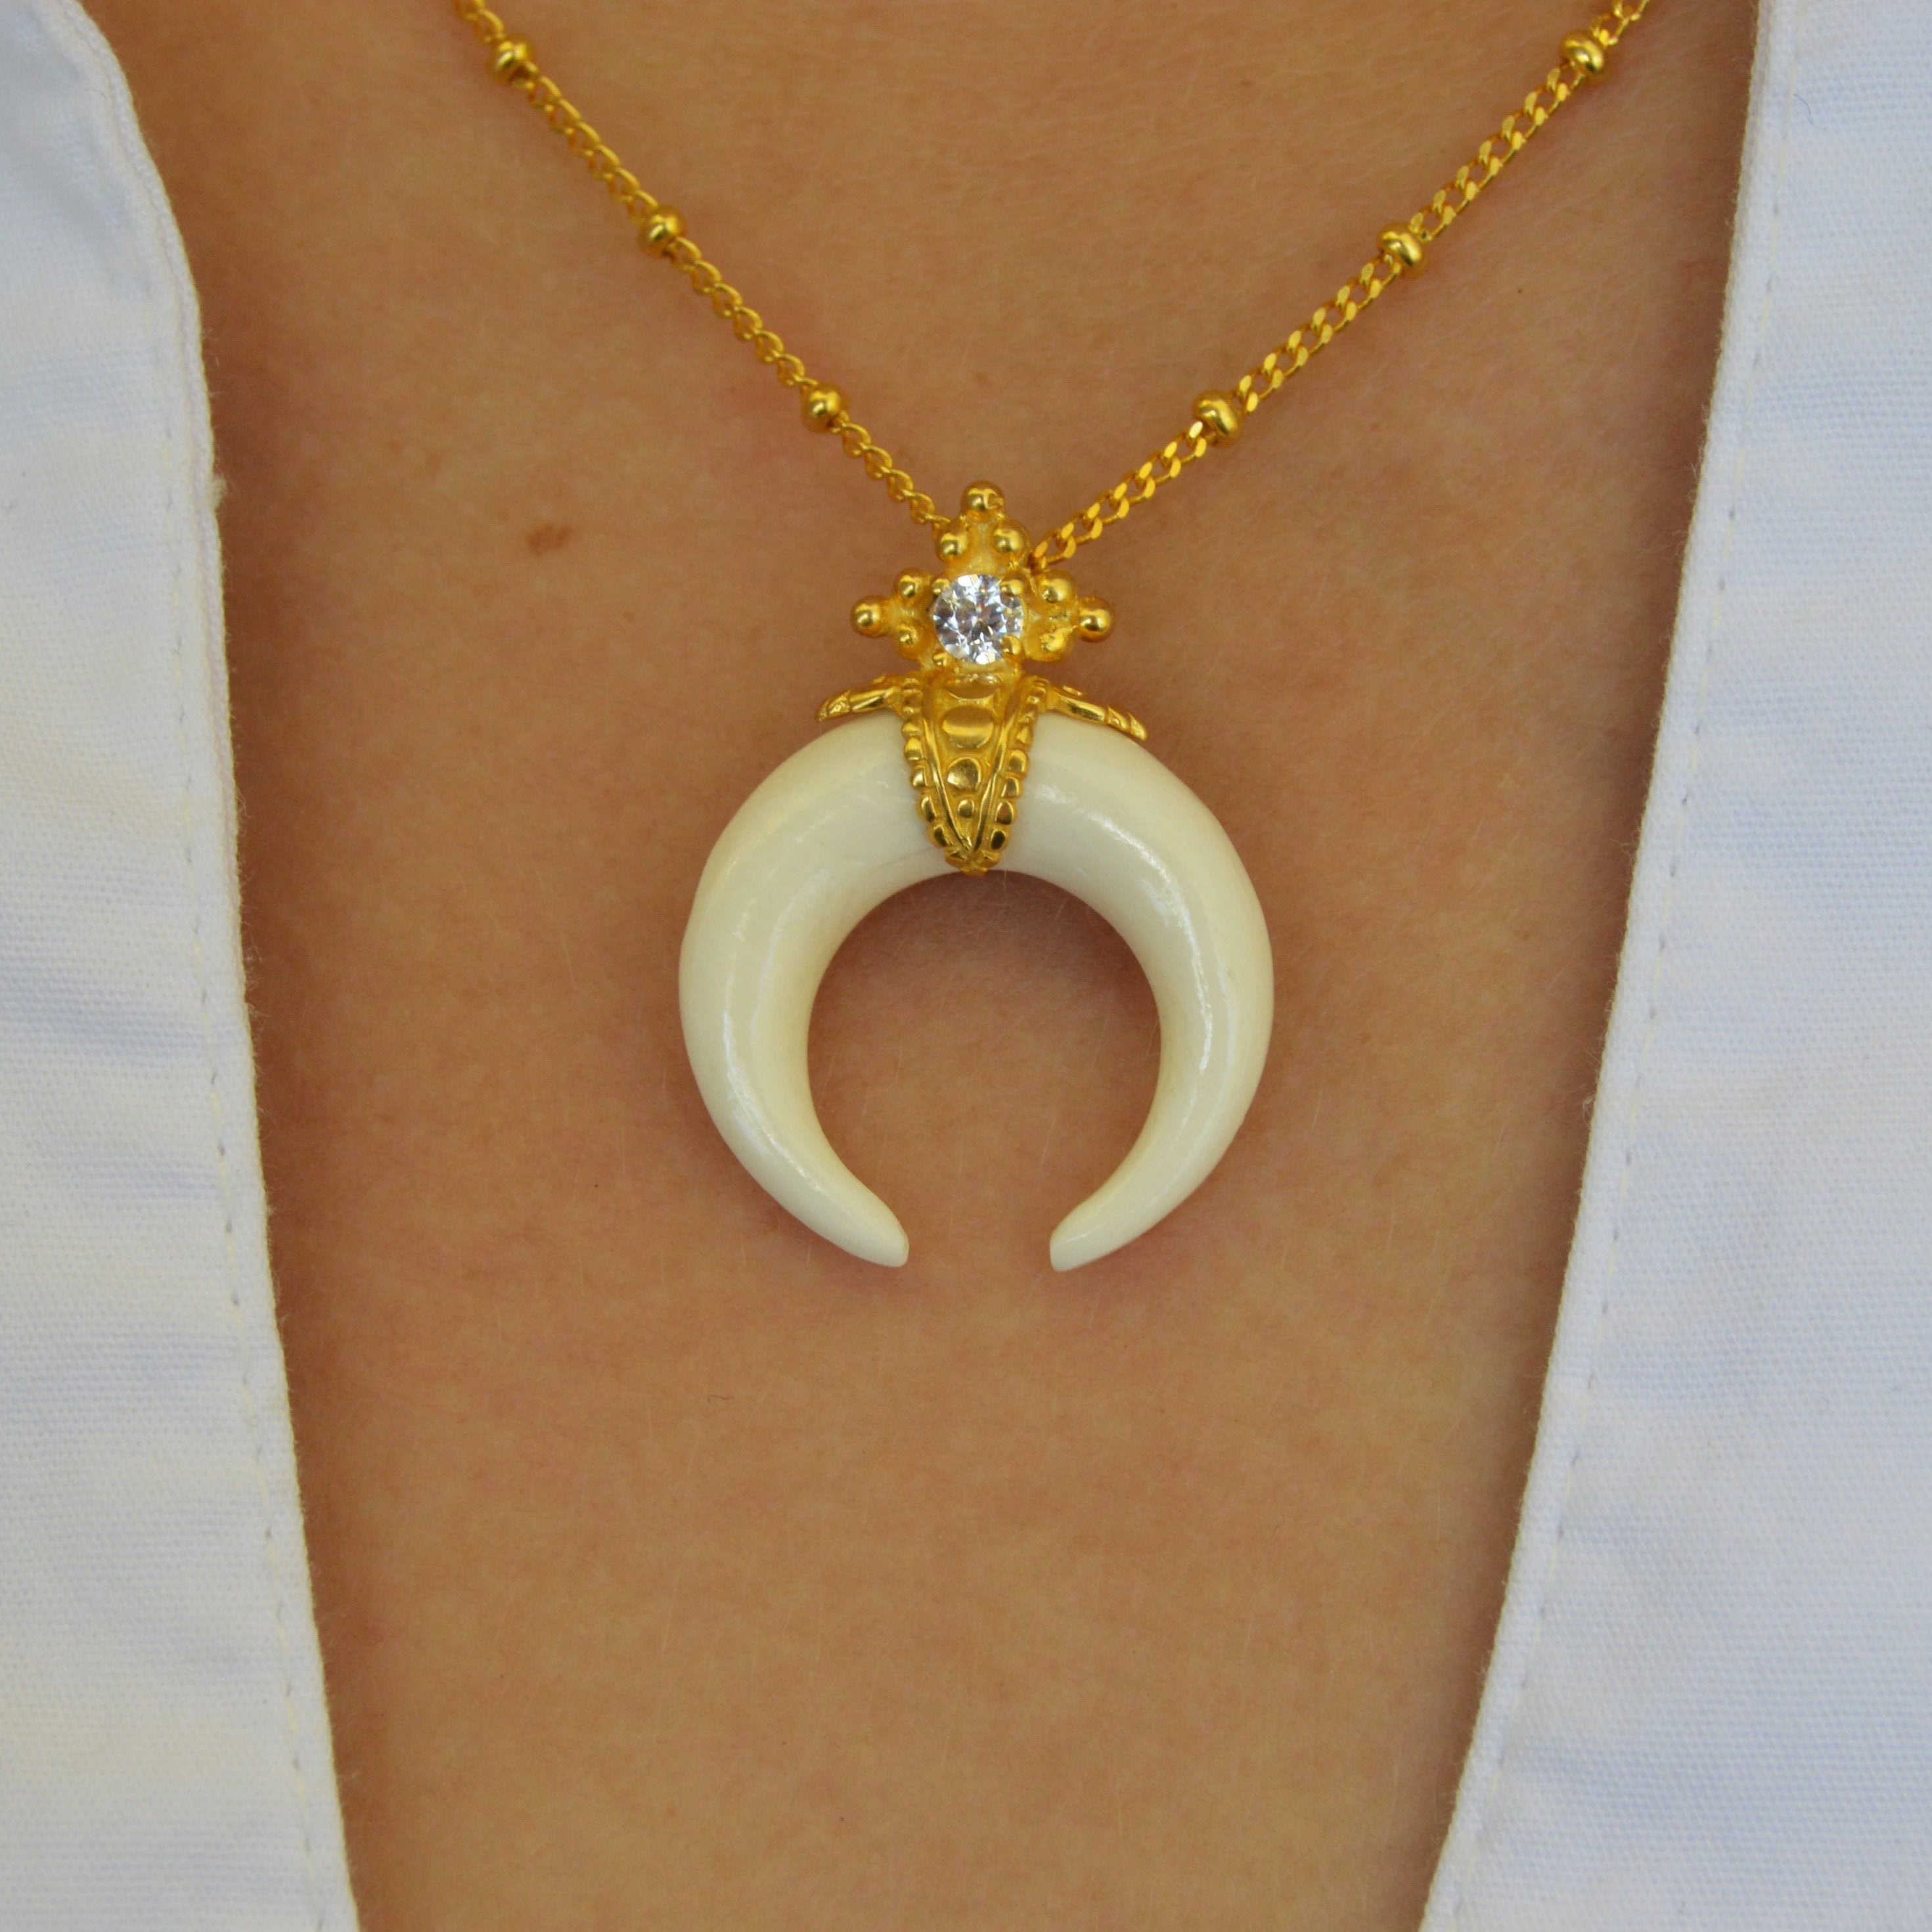 Crescent Moon Stevie Nicks Style Moon Necklace in Sterling Silver with 24K  Gold Overlay, Celestial Moon Necklaces, 18 inch Chain, Artisan